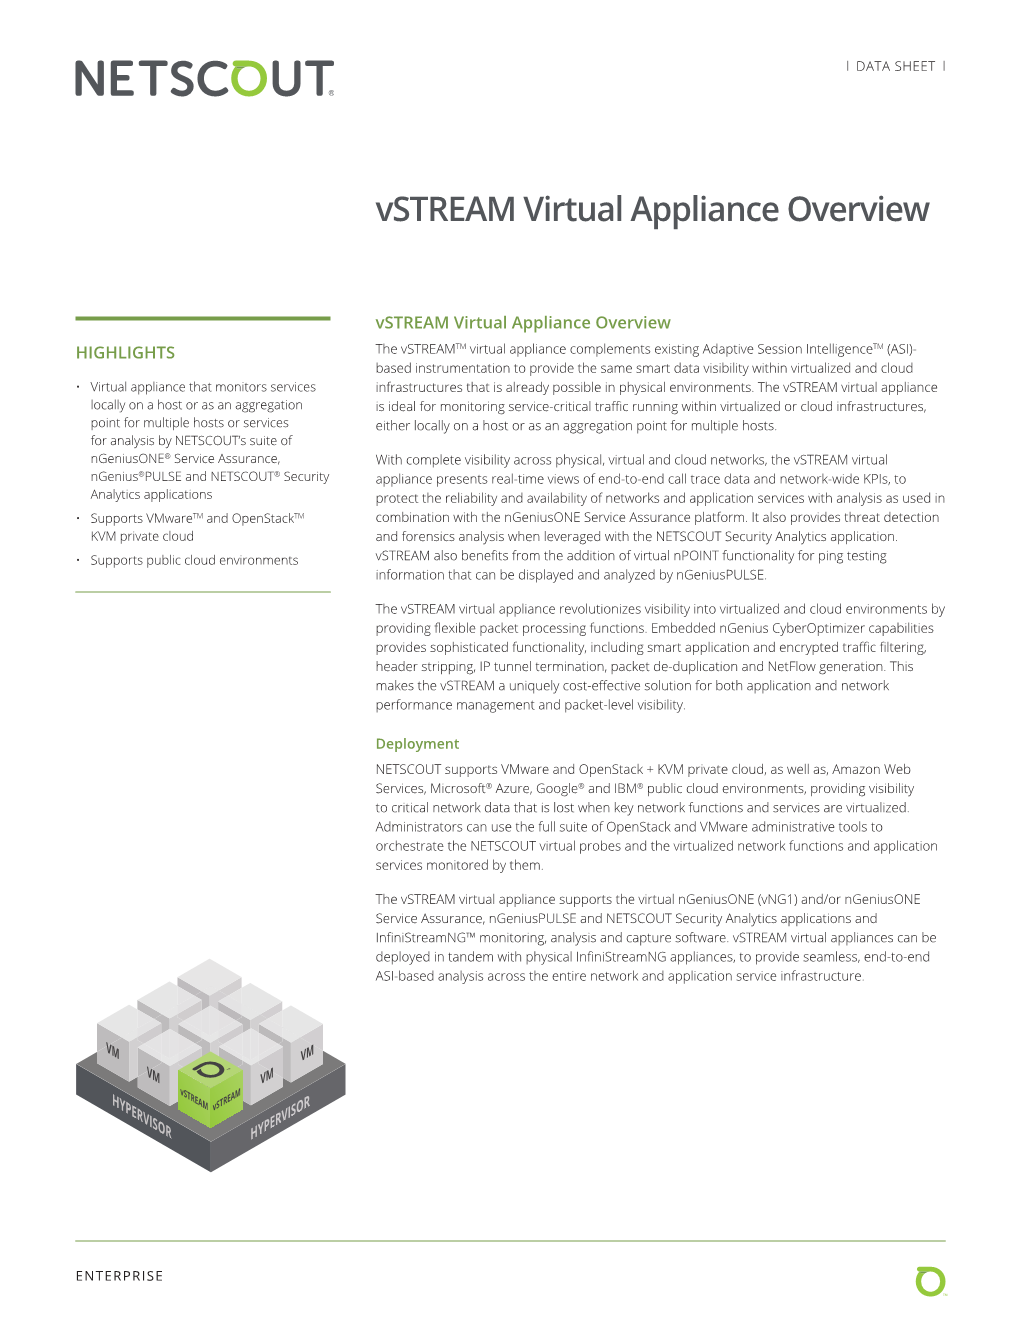 Vstream Virtual Appliance Overview